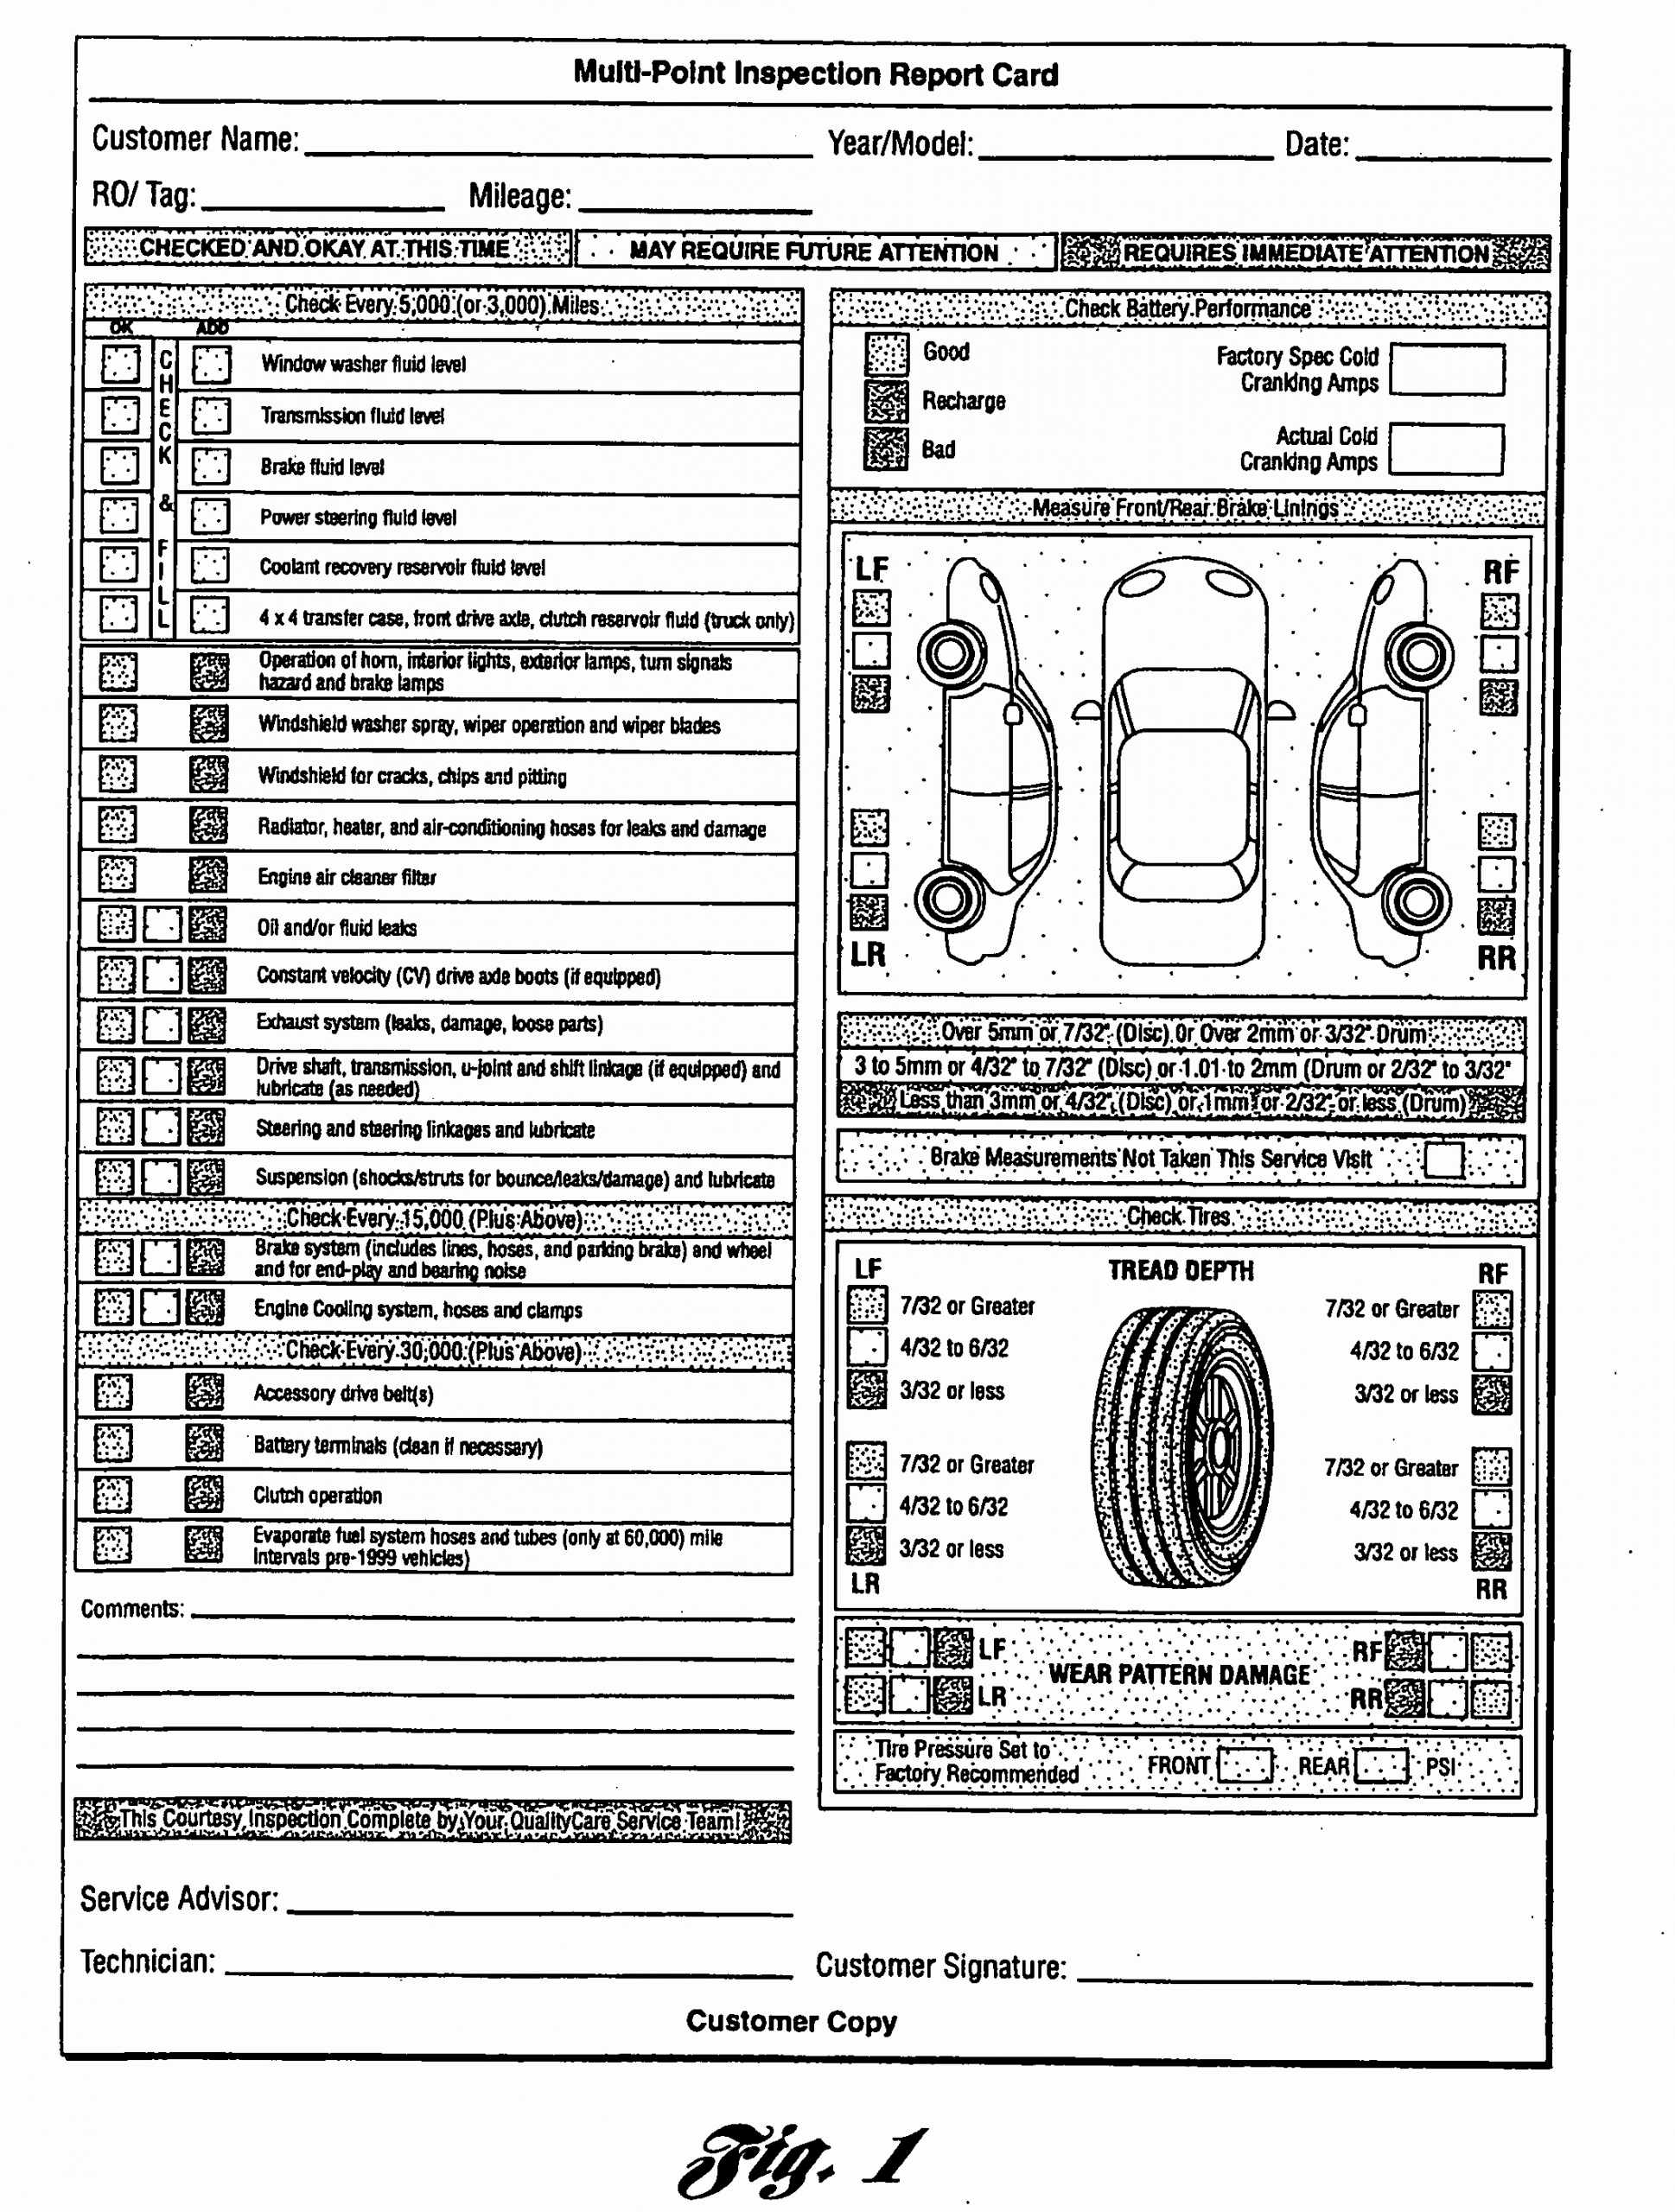 Daily Vehicle Inspection form Template Best Of Multi Point Inspection Report Card as Re Mended by ford